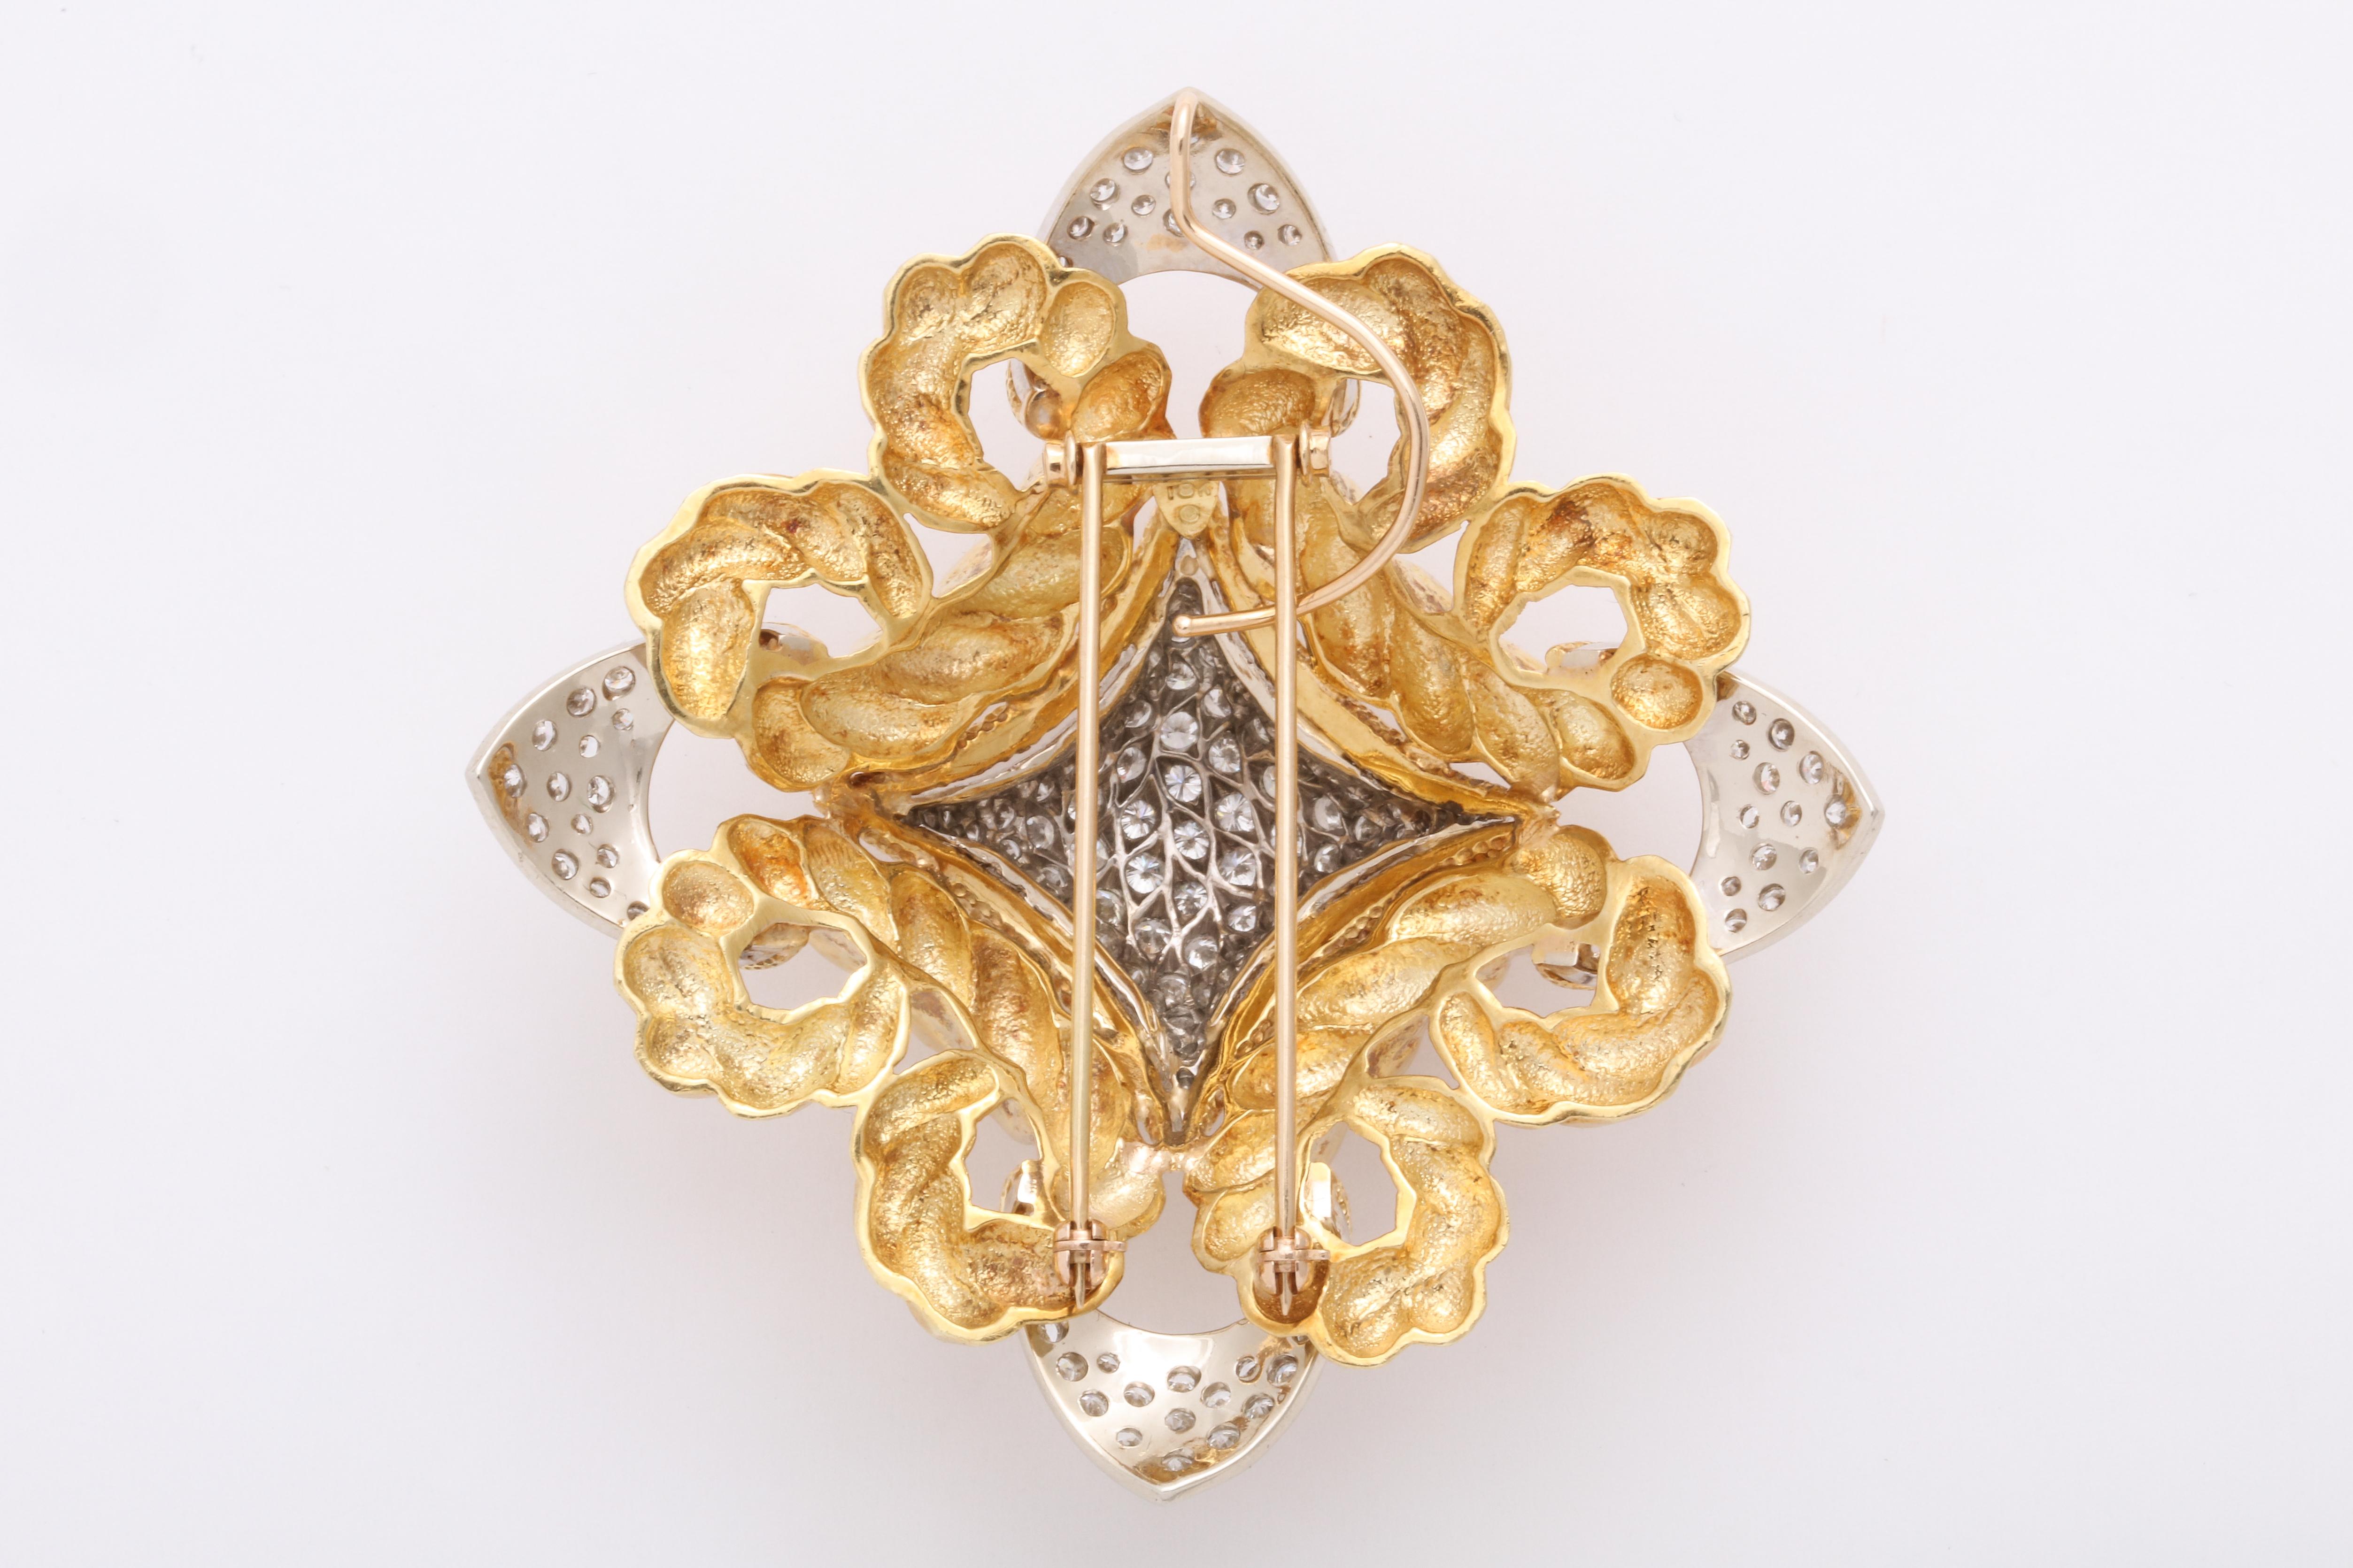 Baroque 18 Karat Yellow and White Gold and Diamond Pendant Brooch